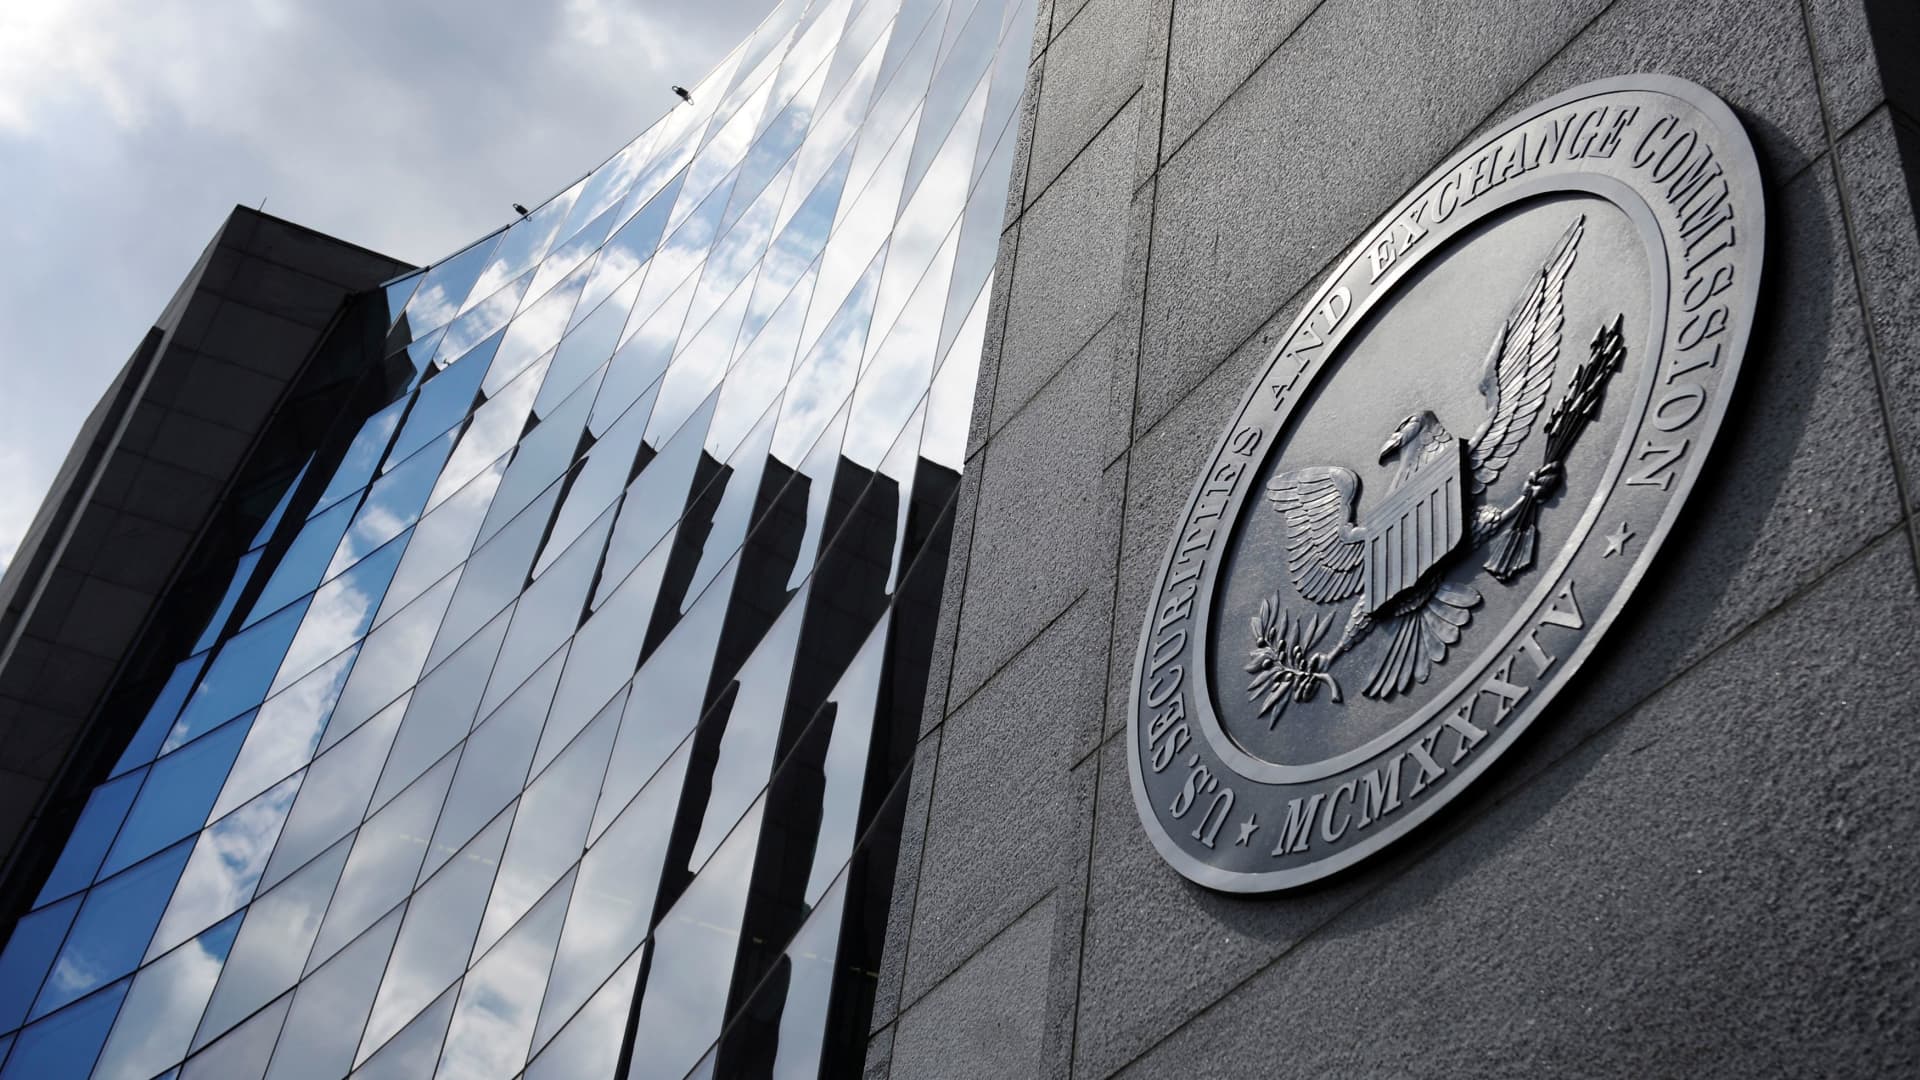 SEC issues new guidance requiring companies to disclose digital currency risks